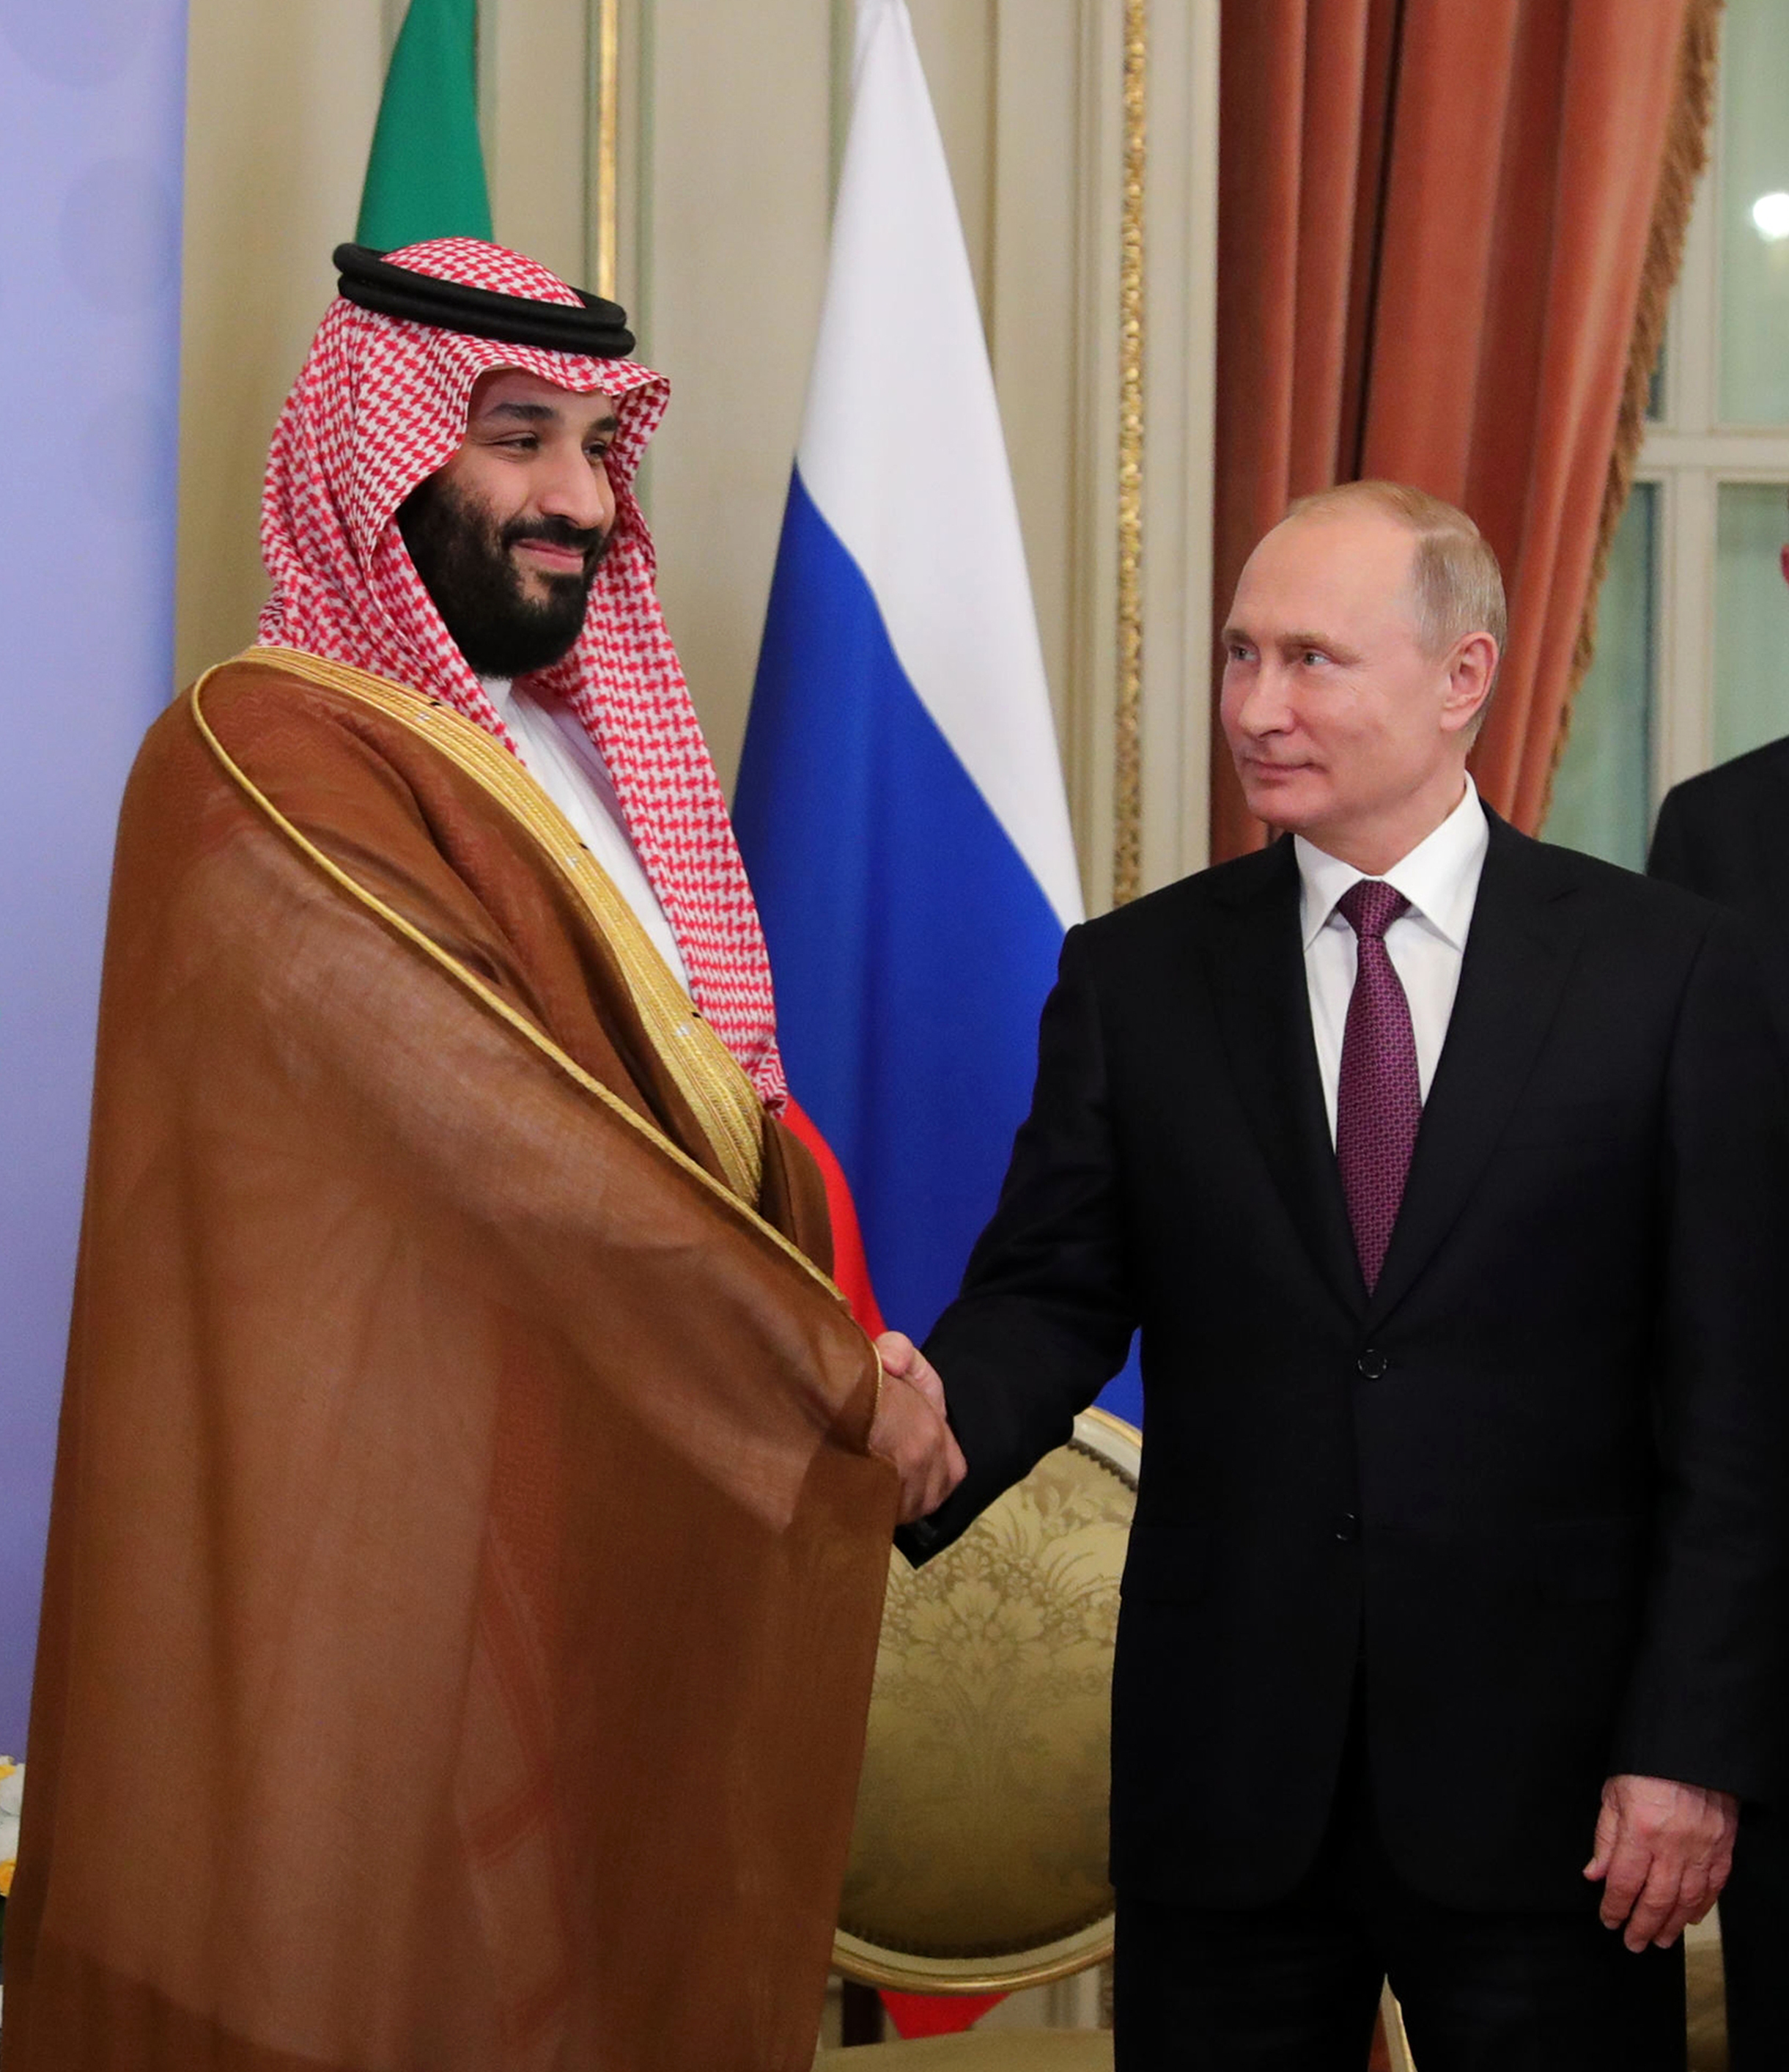 Saudi Arabia's Crown Prince Mohammed bin Salman, left, and Russian President Vladimir Putin, shake hands prior their talks at the G20 summit in Buenos Aires